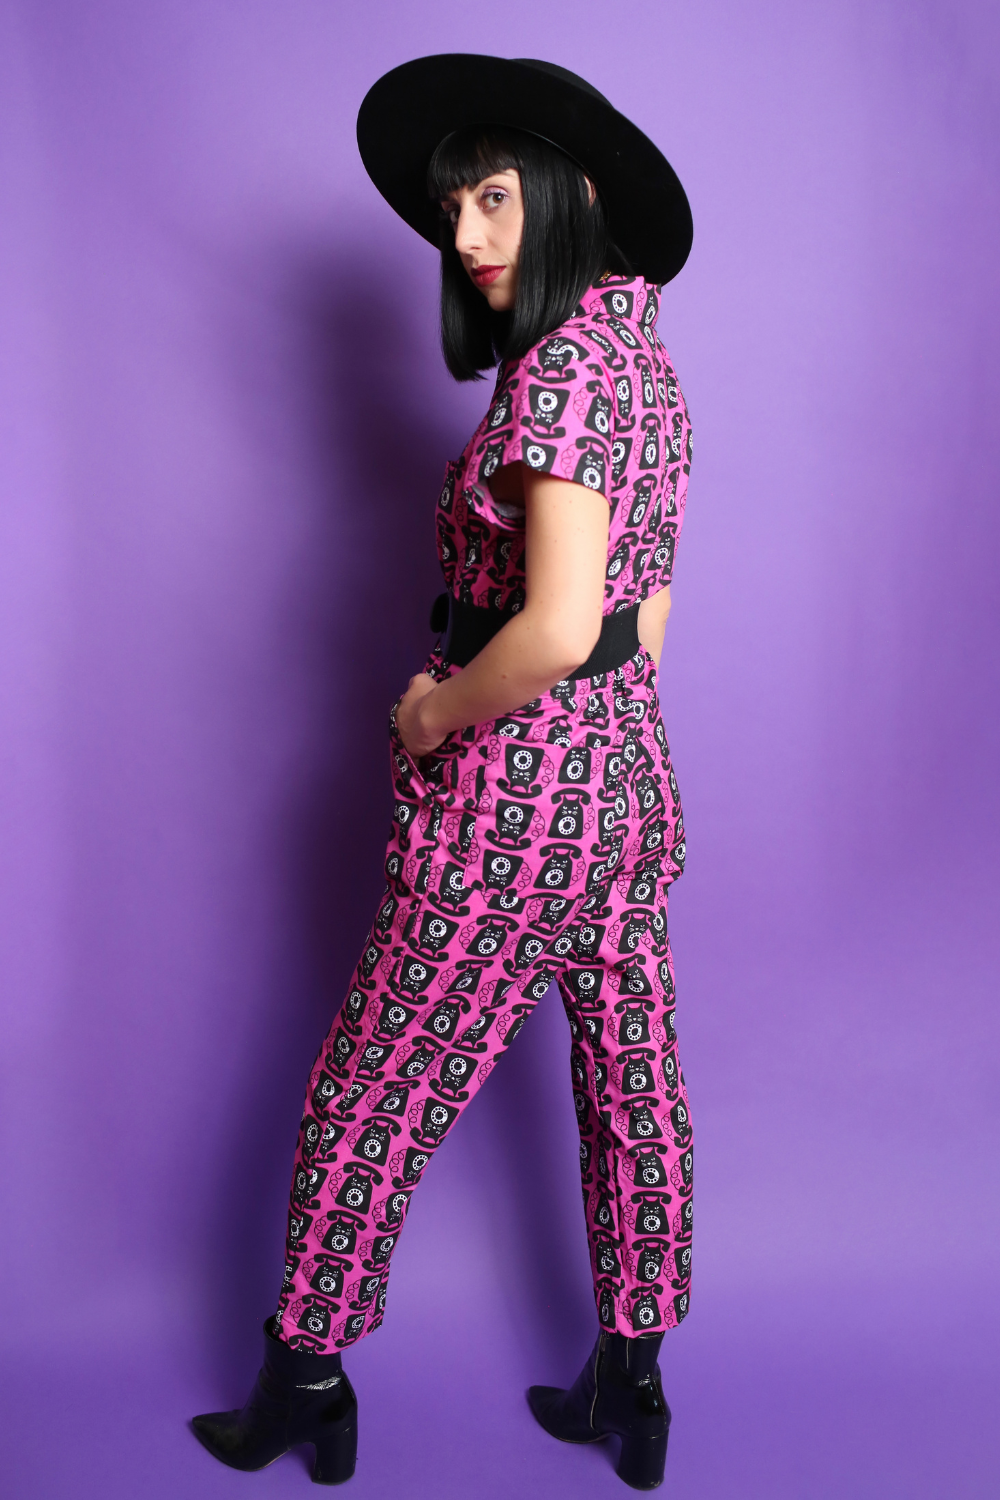 Black haired model in black hat and pink and black printed jumpsuit, back view